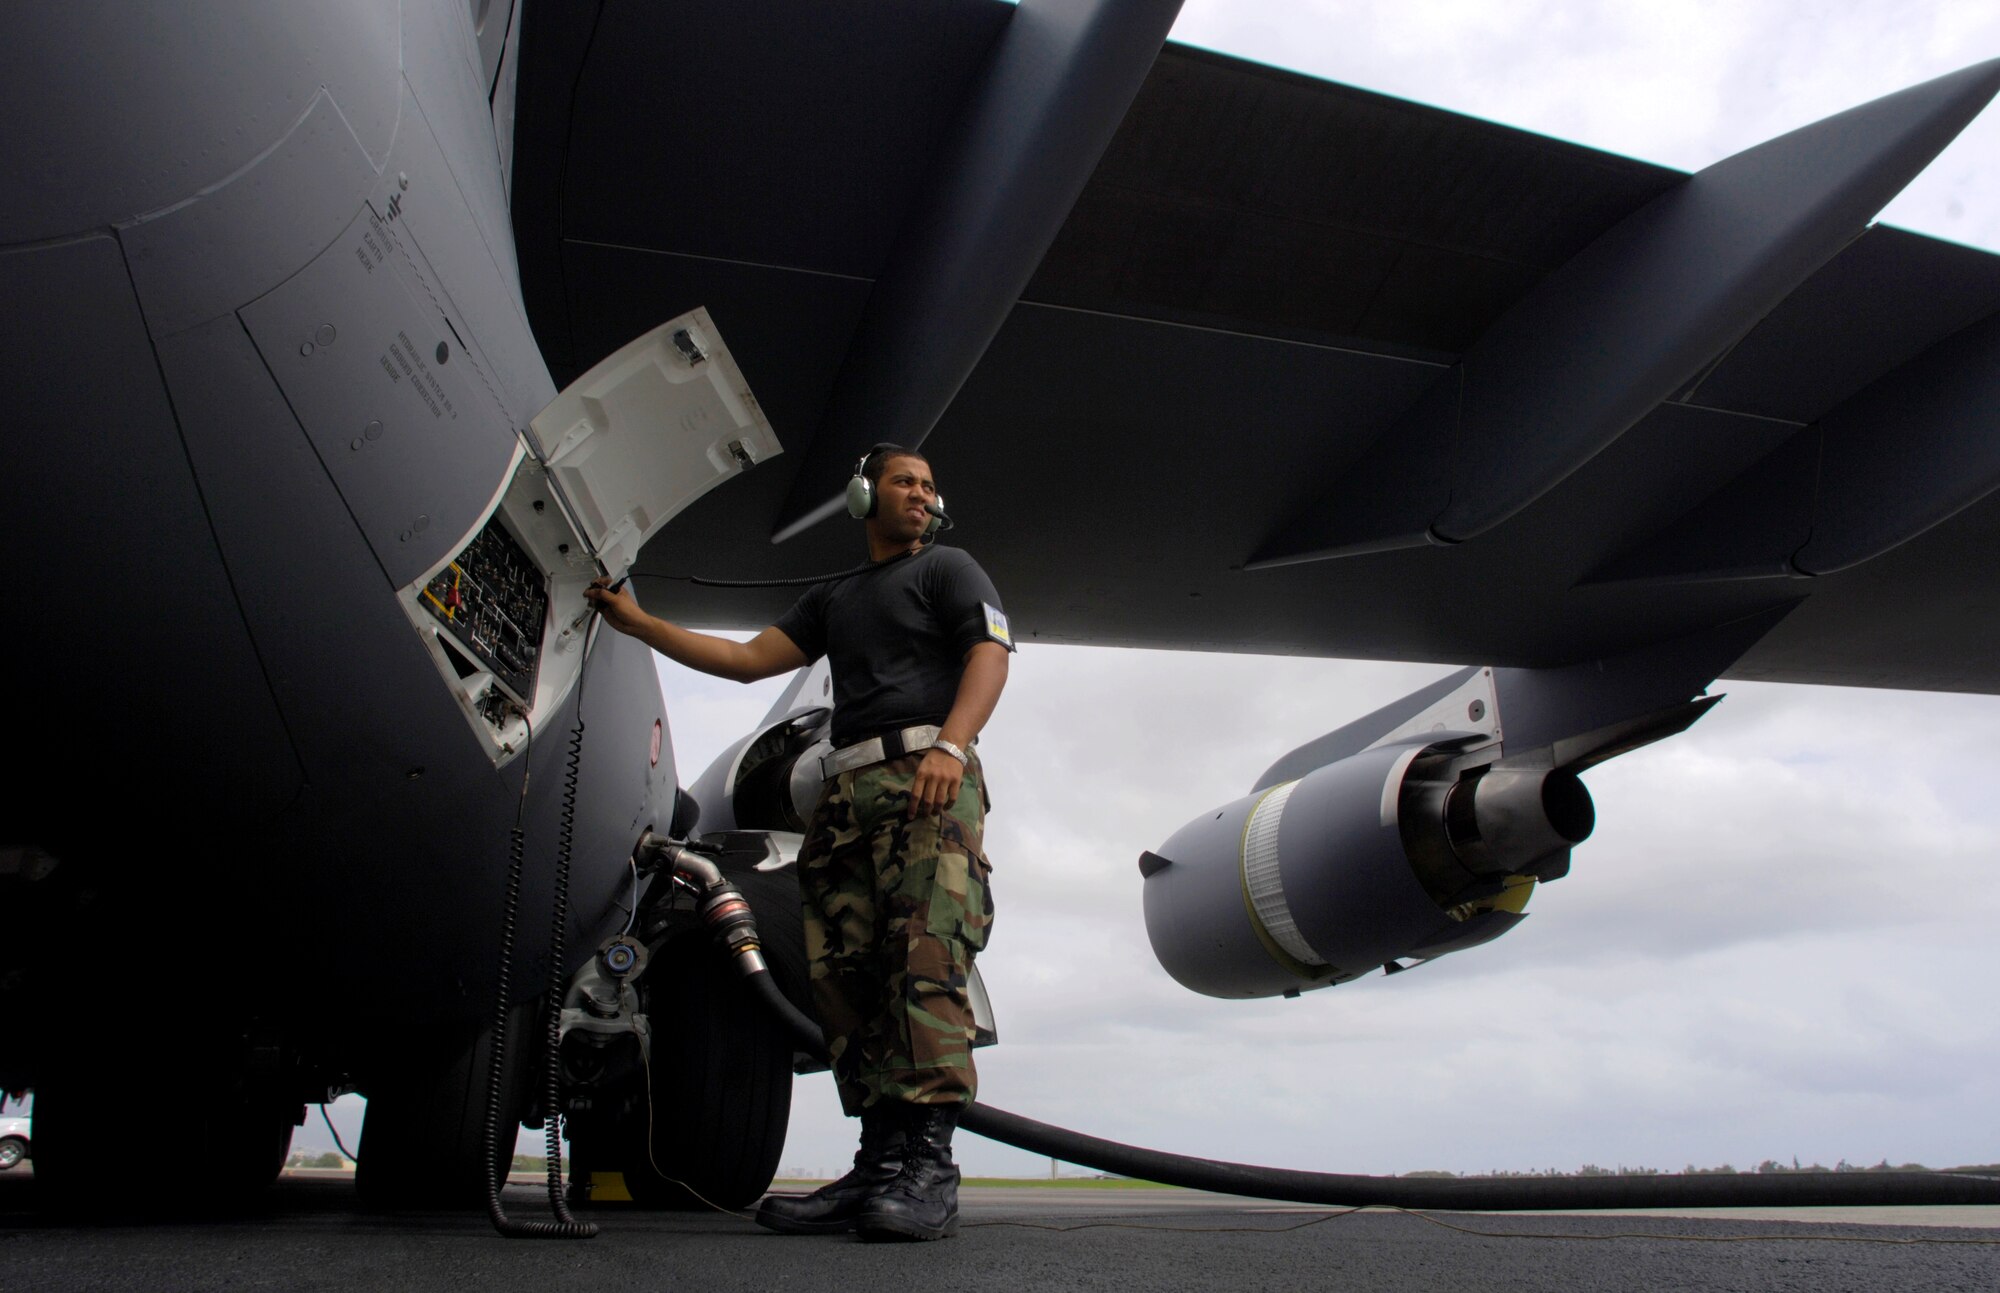 HICKAM AIR FORCE BASE, Hawaii -- Airman First Class Justin Soileau-Gobert refuels a C-17 Globemaster III. A1C Soileau-Gobert is a crew chief from the 15th Maintenance Group. The first combined active duty and Air National Guard maintenance group of its kind.